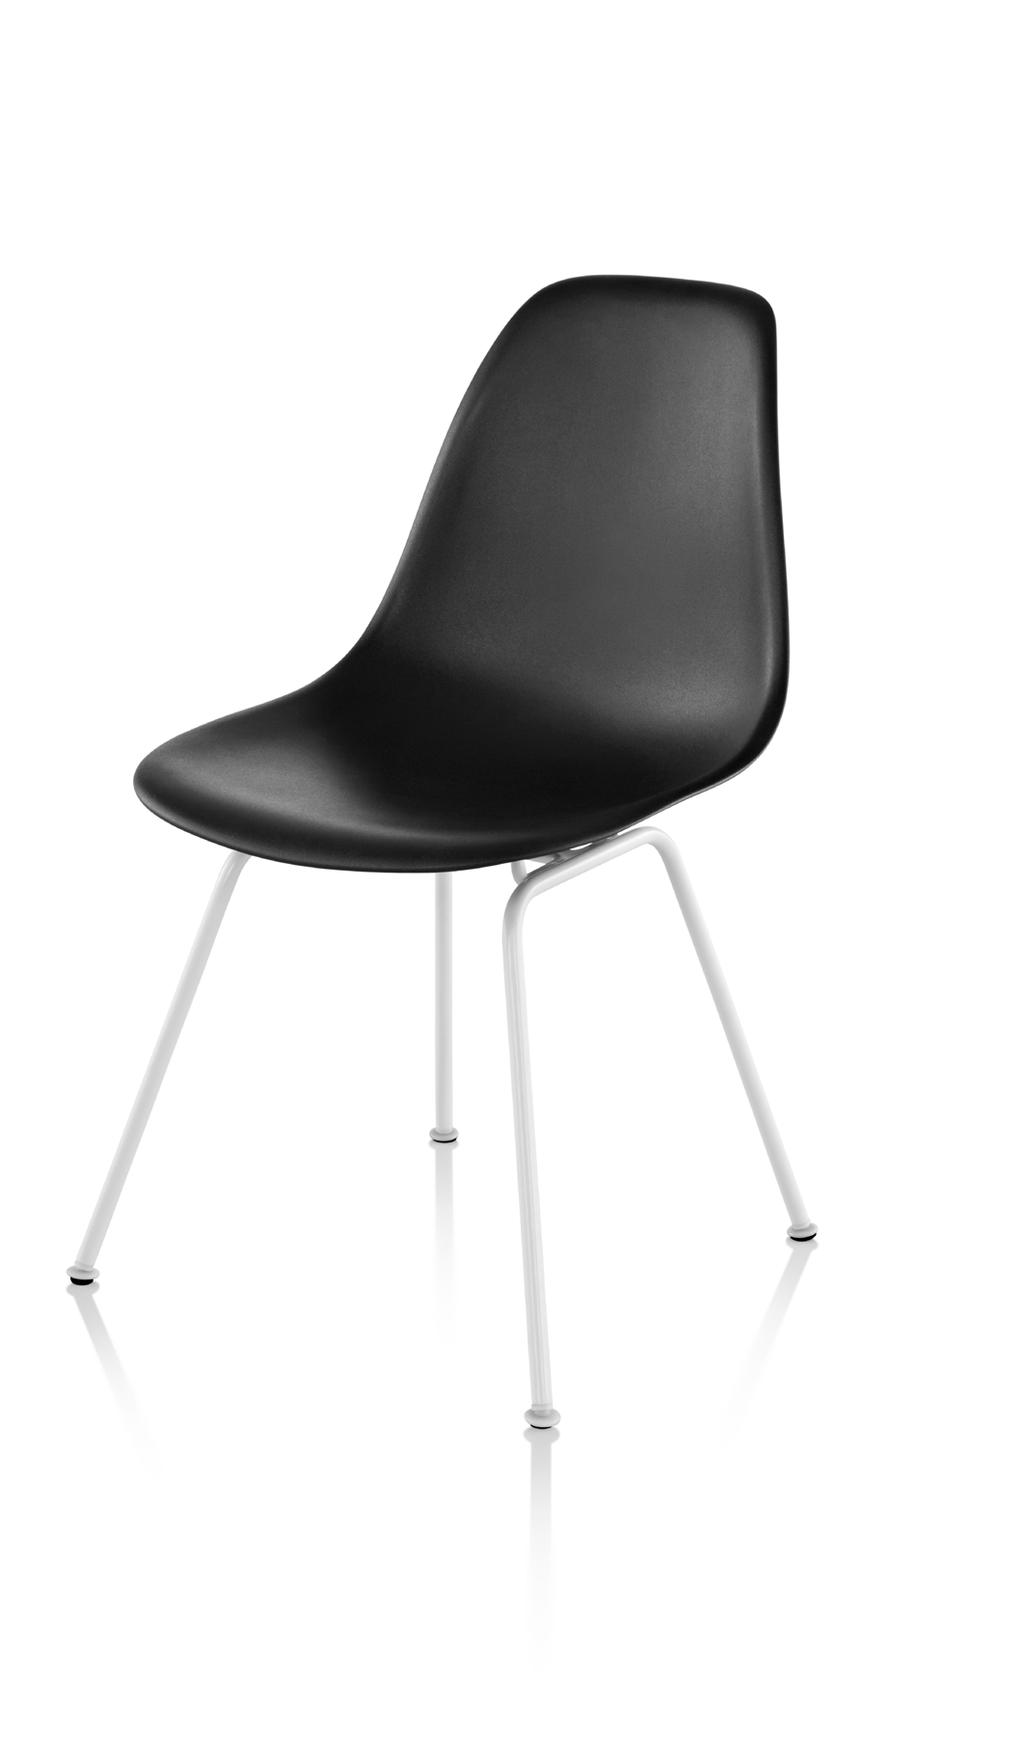 Eames Molded Plastic Side Chair 4-Leg Base 19% recycled content; 100% recyclable Exemplifying the designers mantra of the best for the most for the least, molded plastic side chair is as